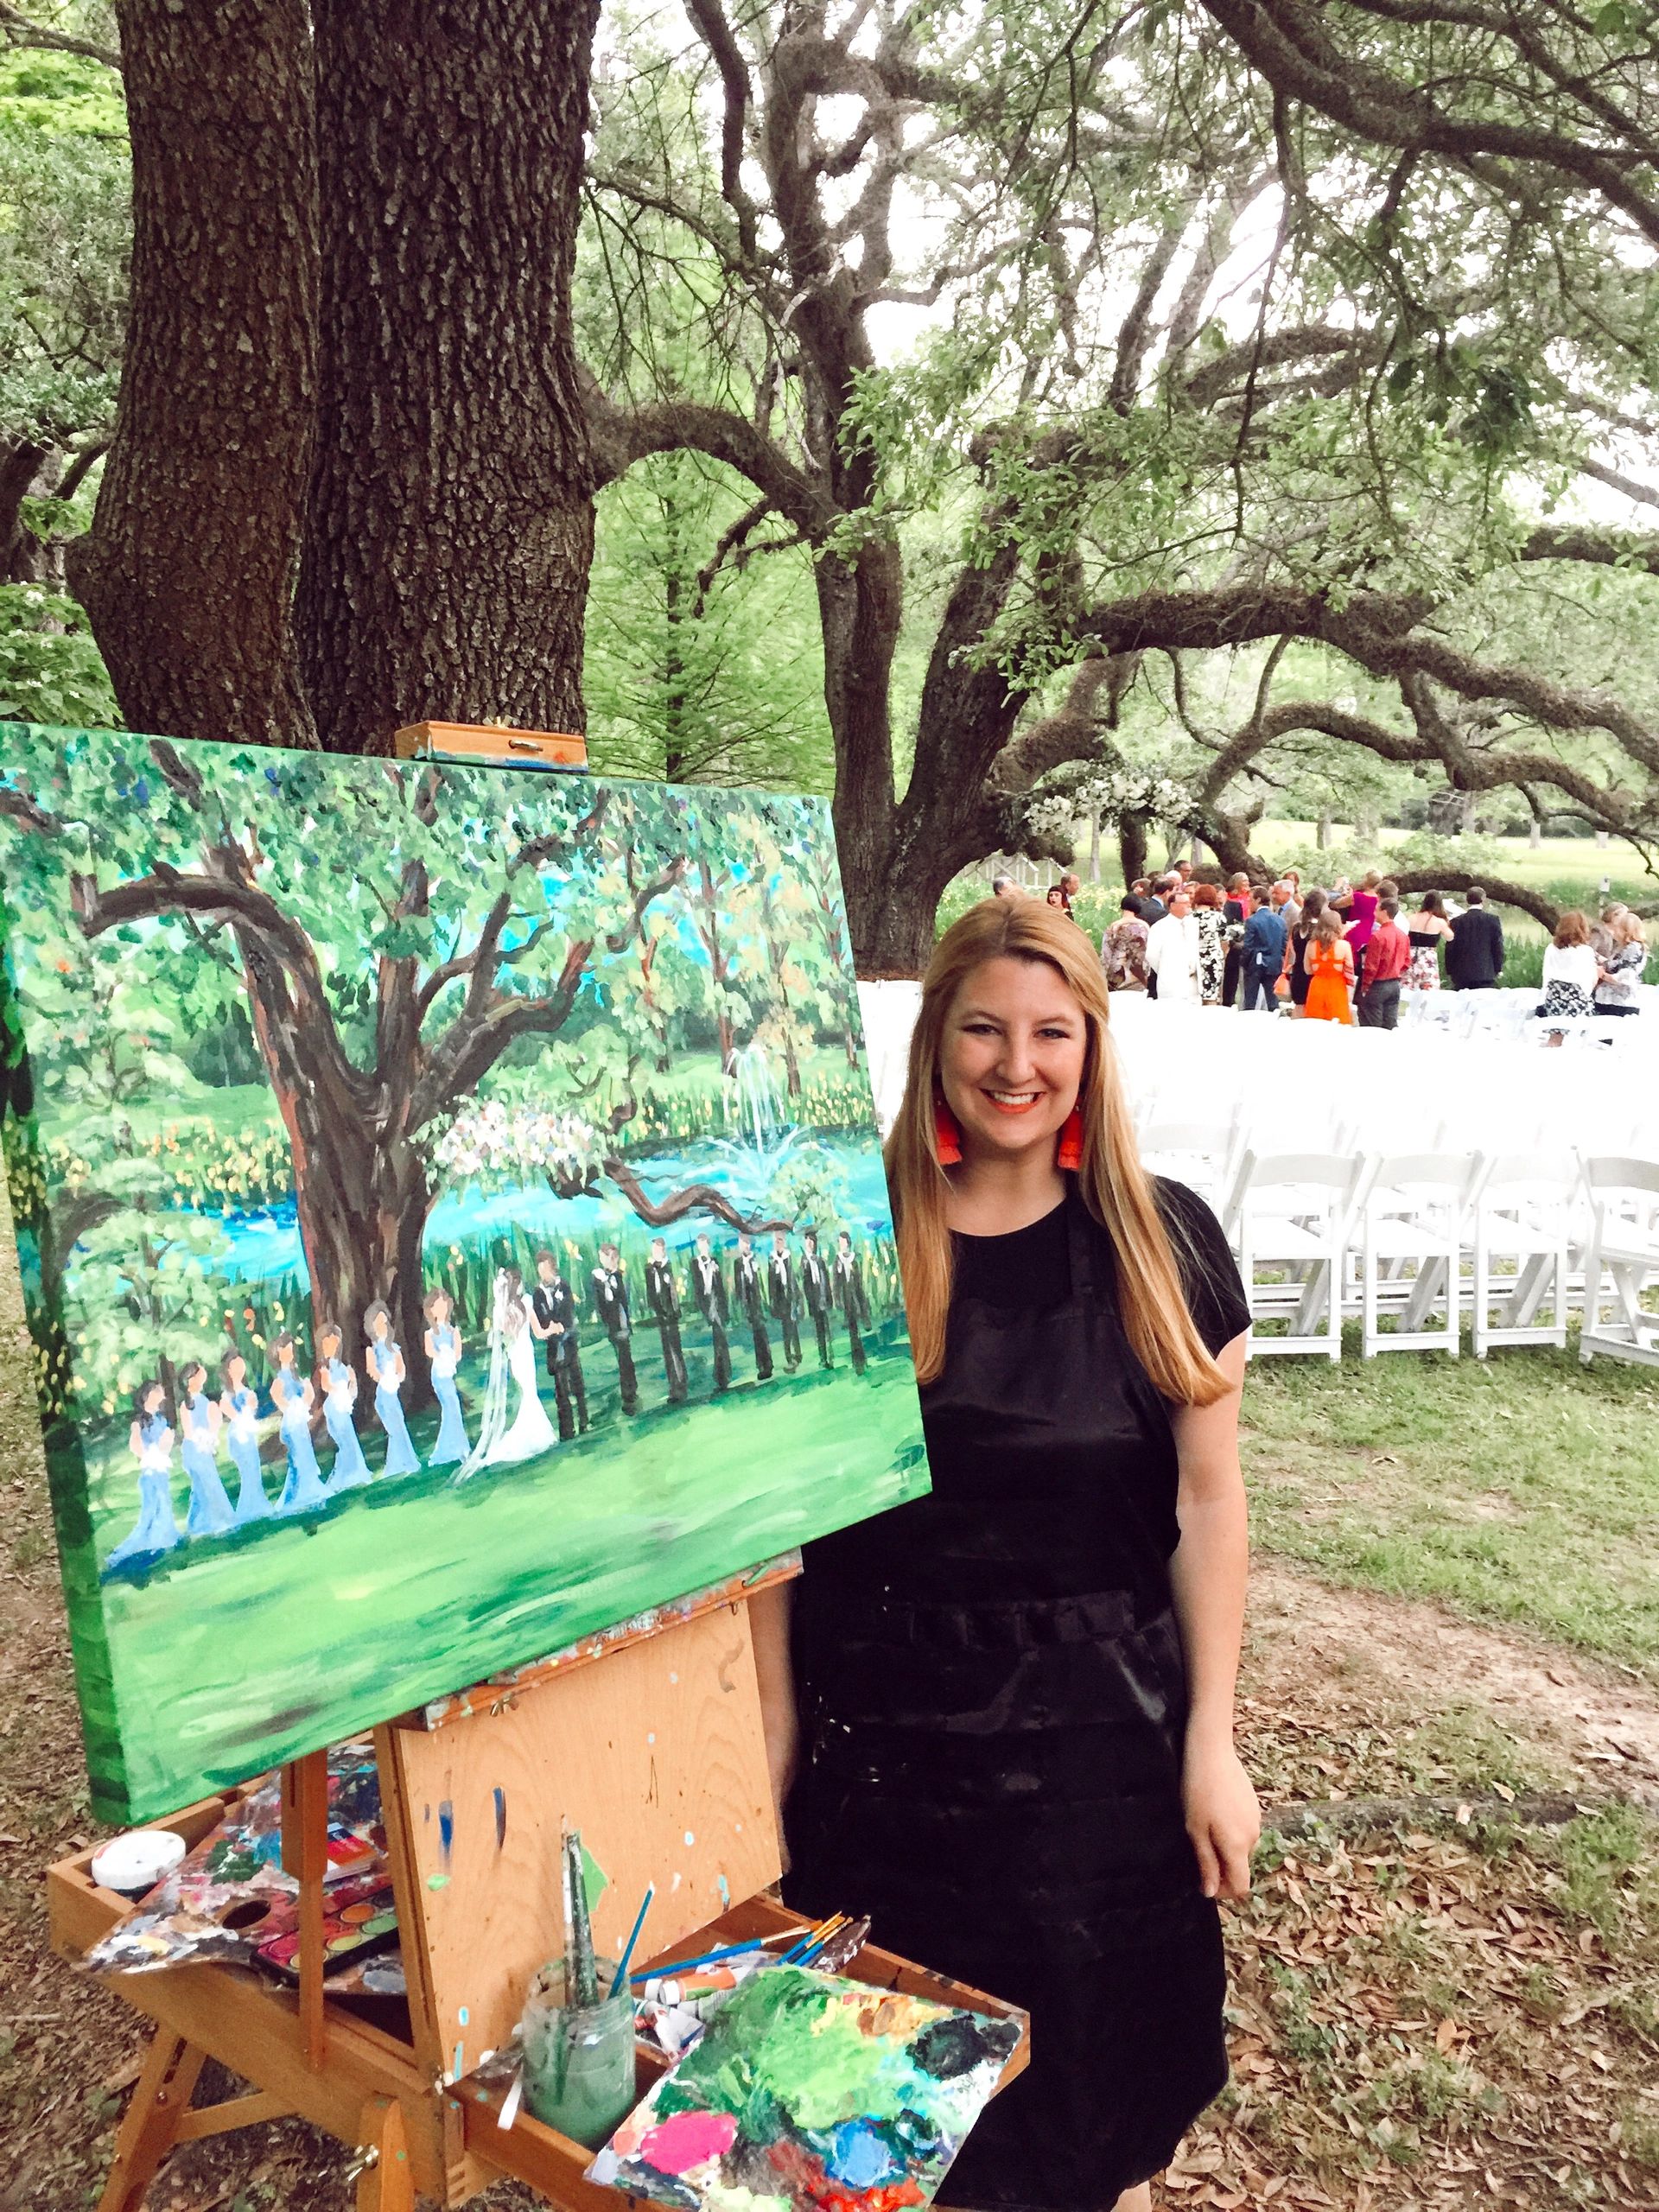 woman artist painting a wedding ceremony live surrounded by trees